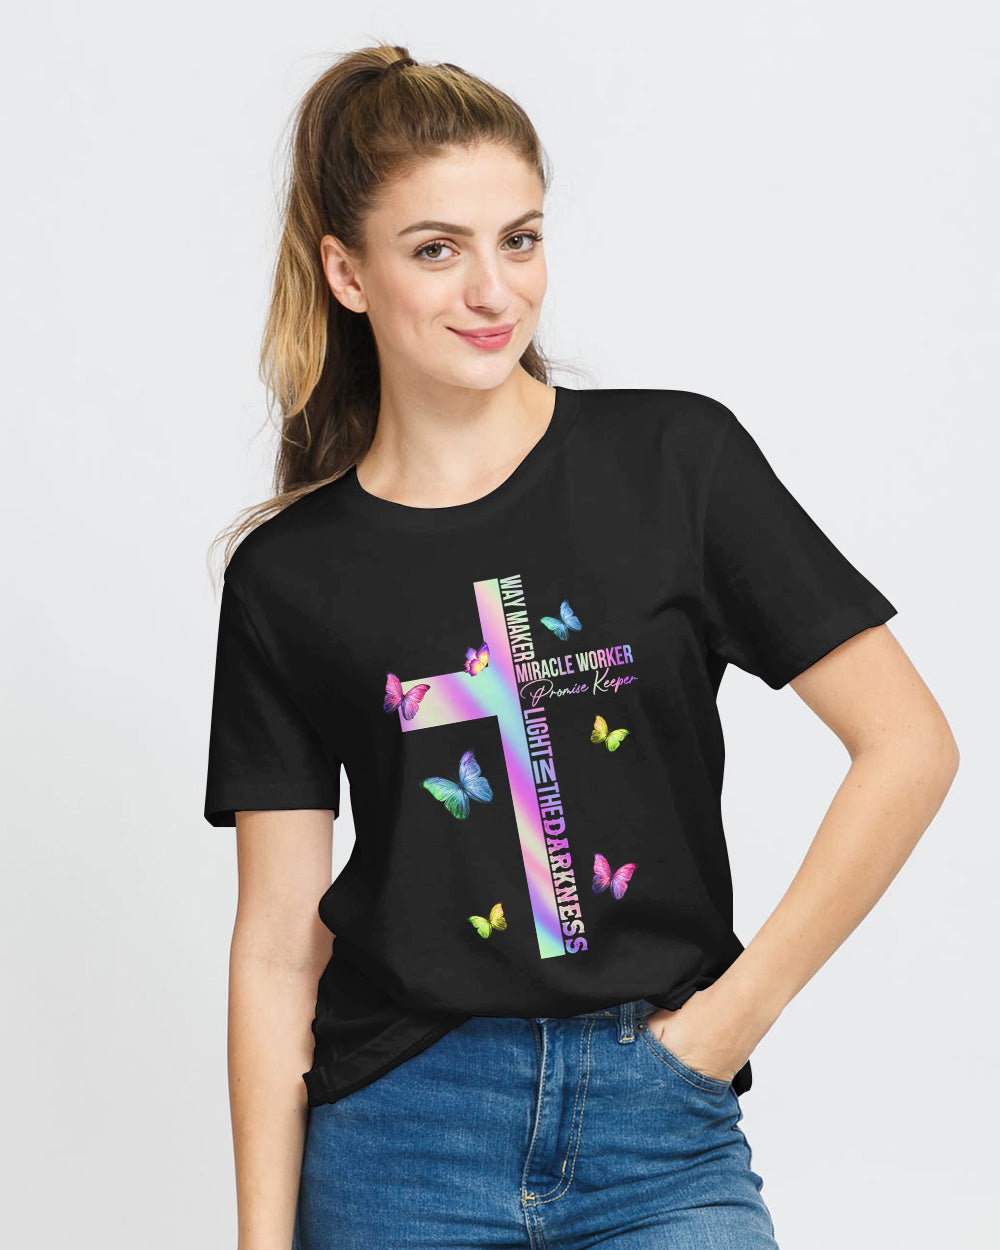 Way Maker Miracle Worker Colorful Butterfly Women's Christian Tshirt